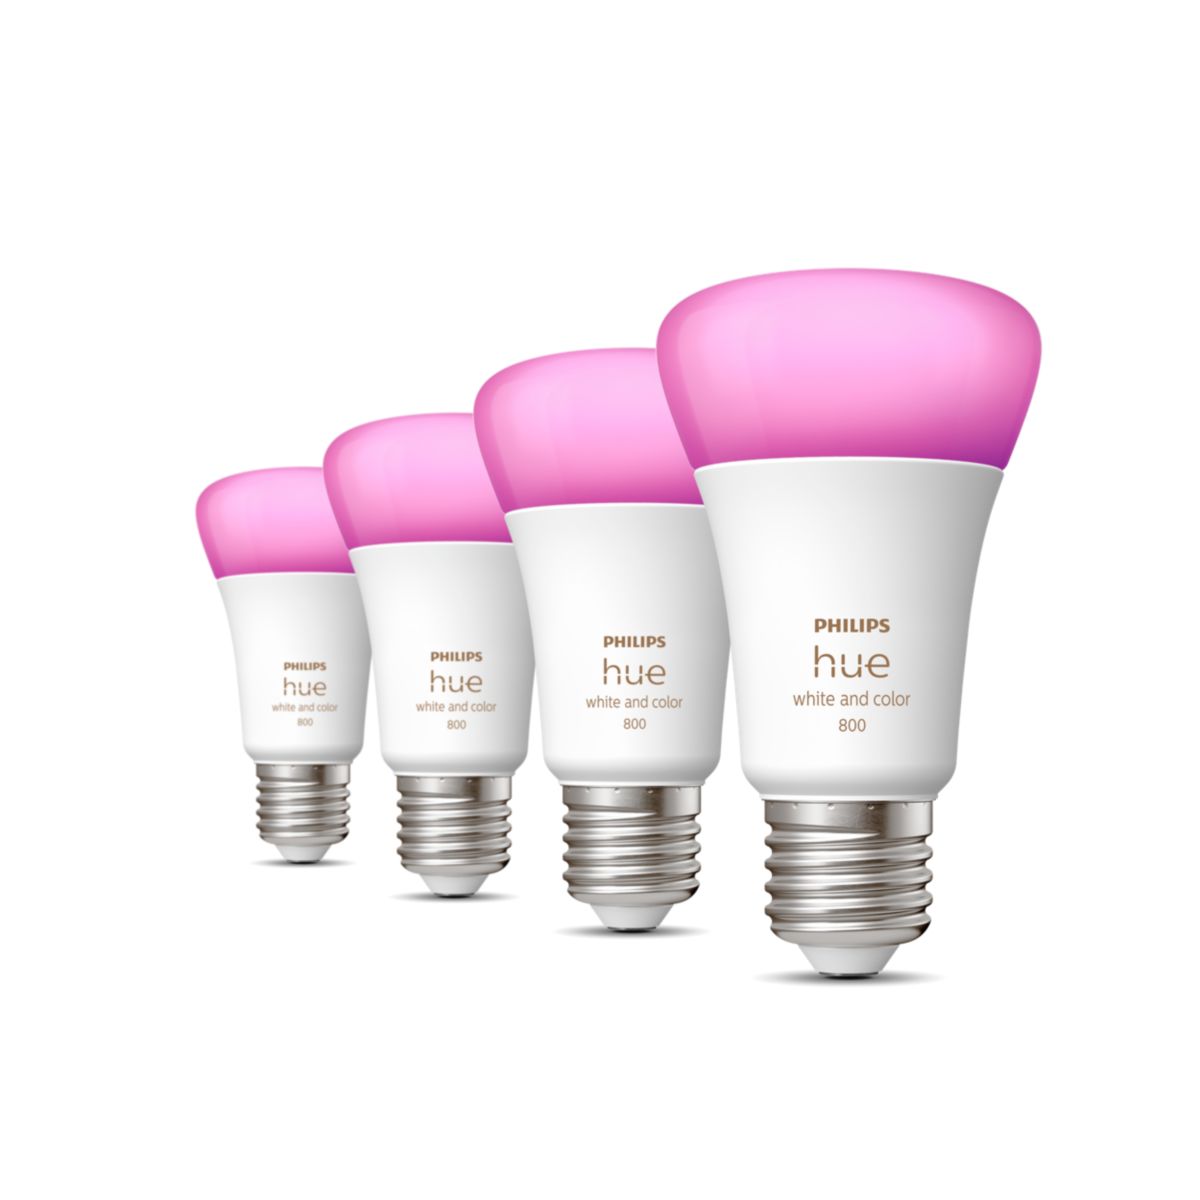 Philips Hue E27 white and color ambiance 800lm 4-pack